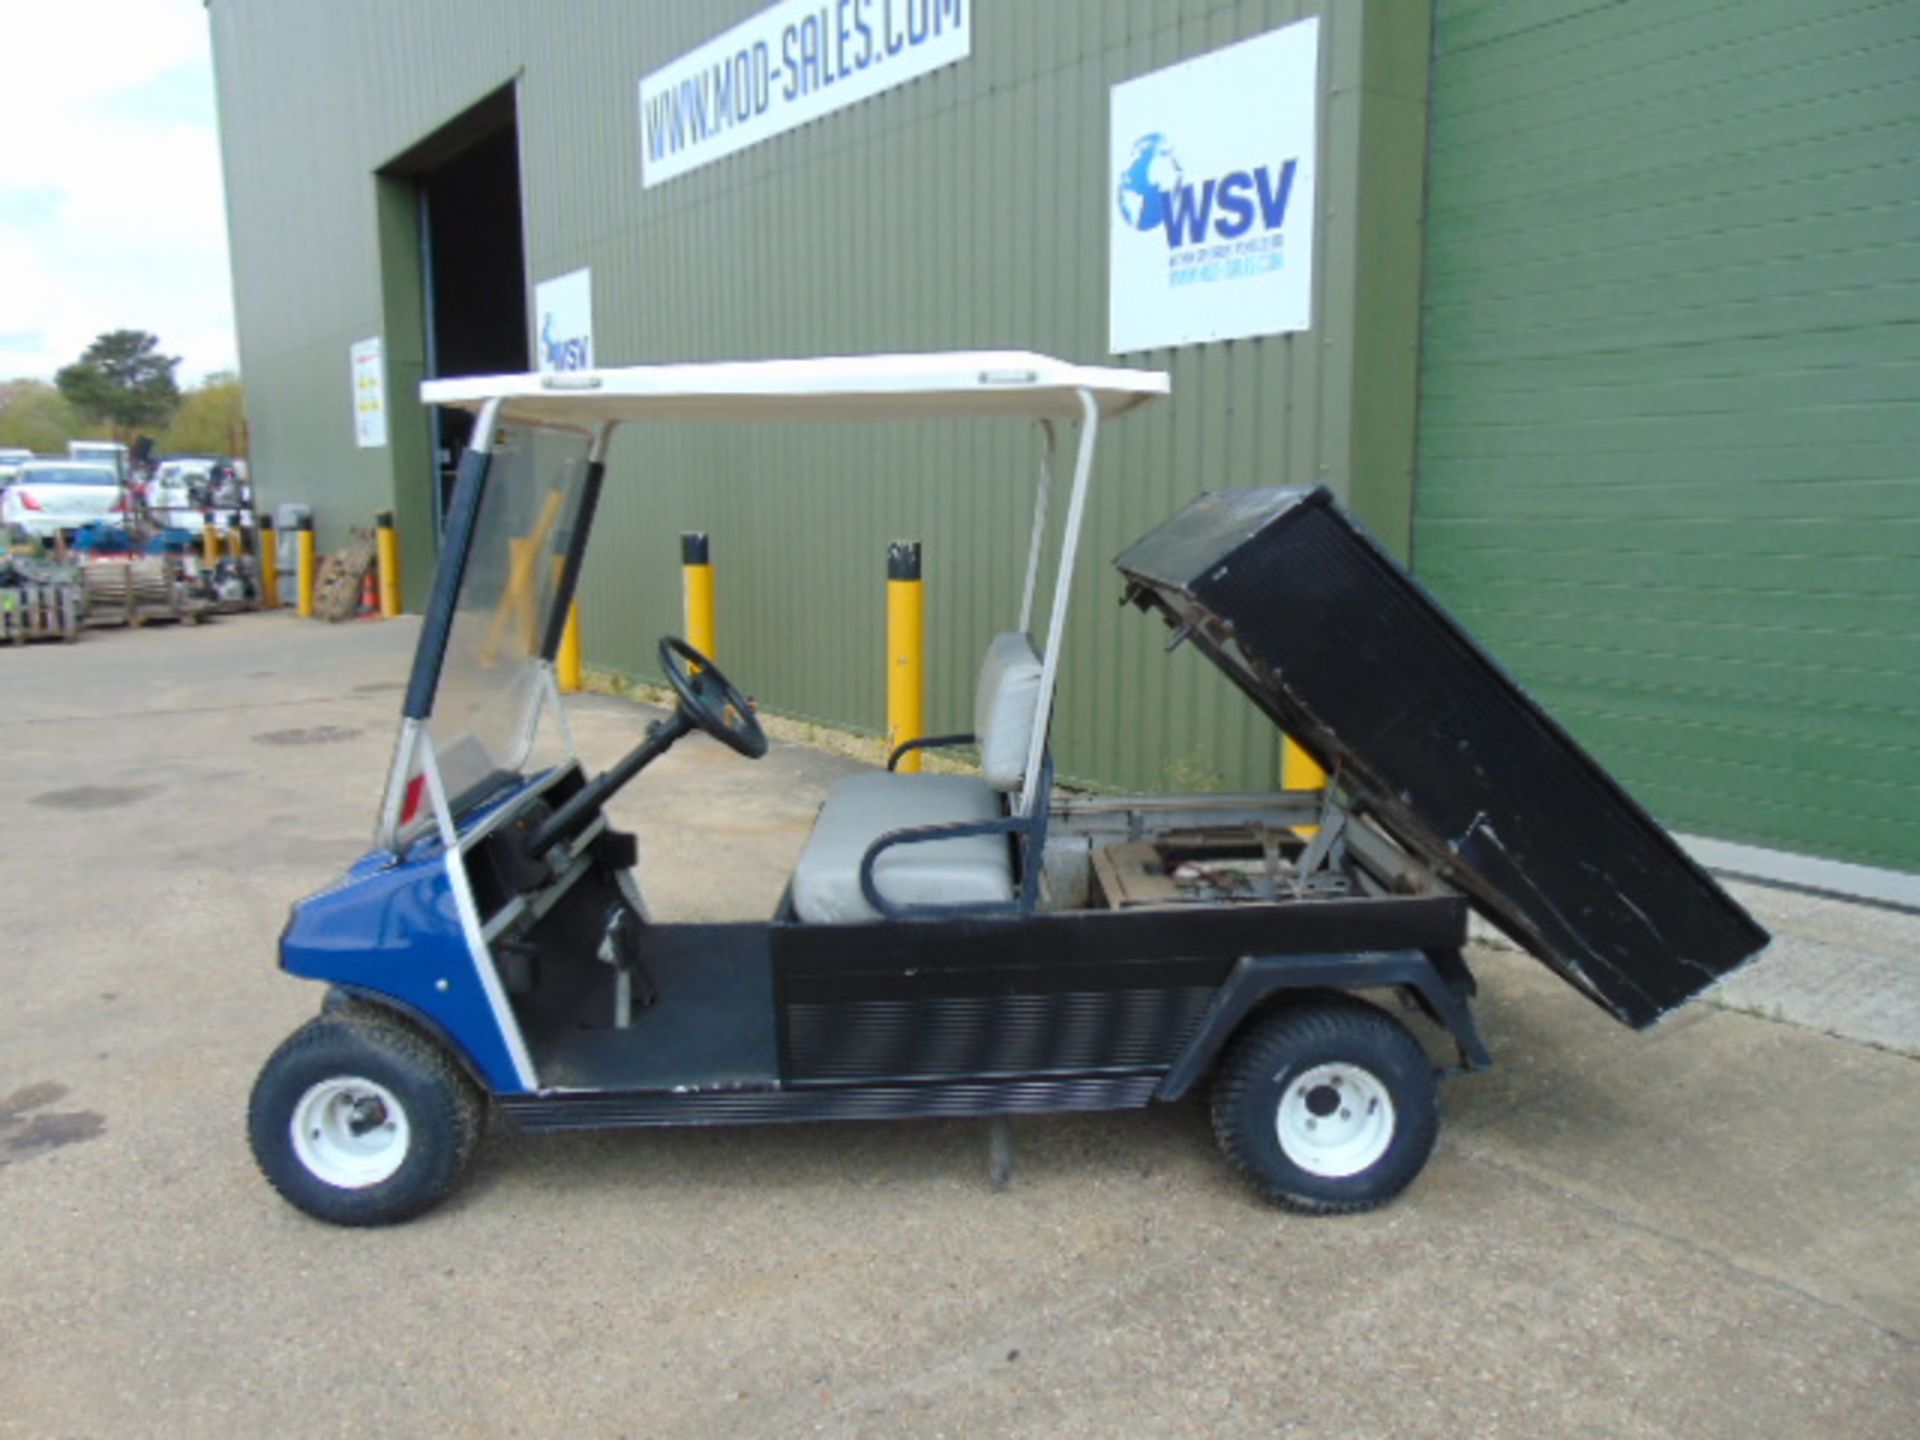 Club Car 2 Seater Golf Buggy / Estate Vehicle C/W Tipping Rear Body - Image 9 of 13